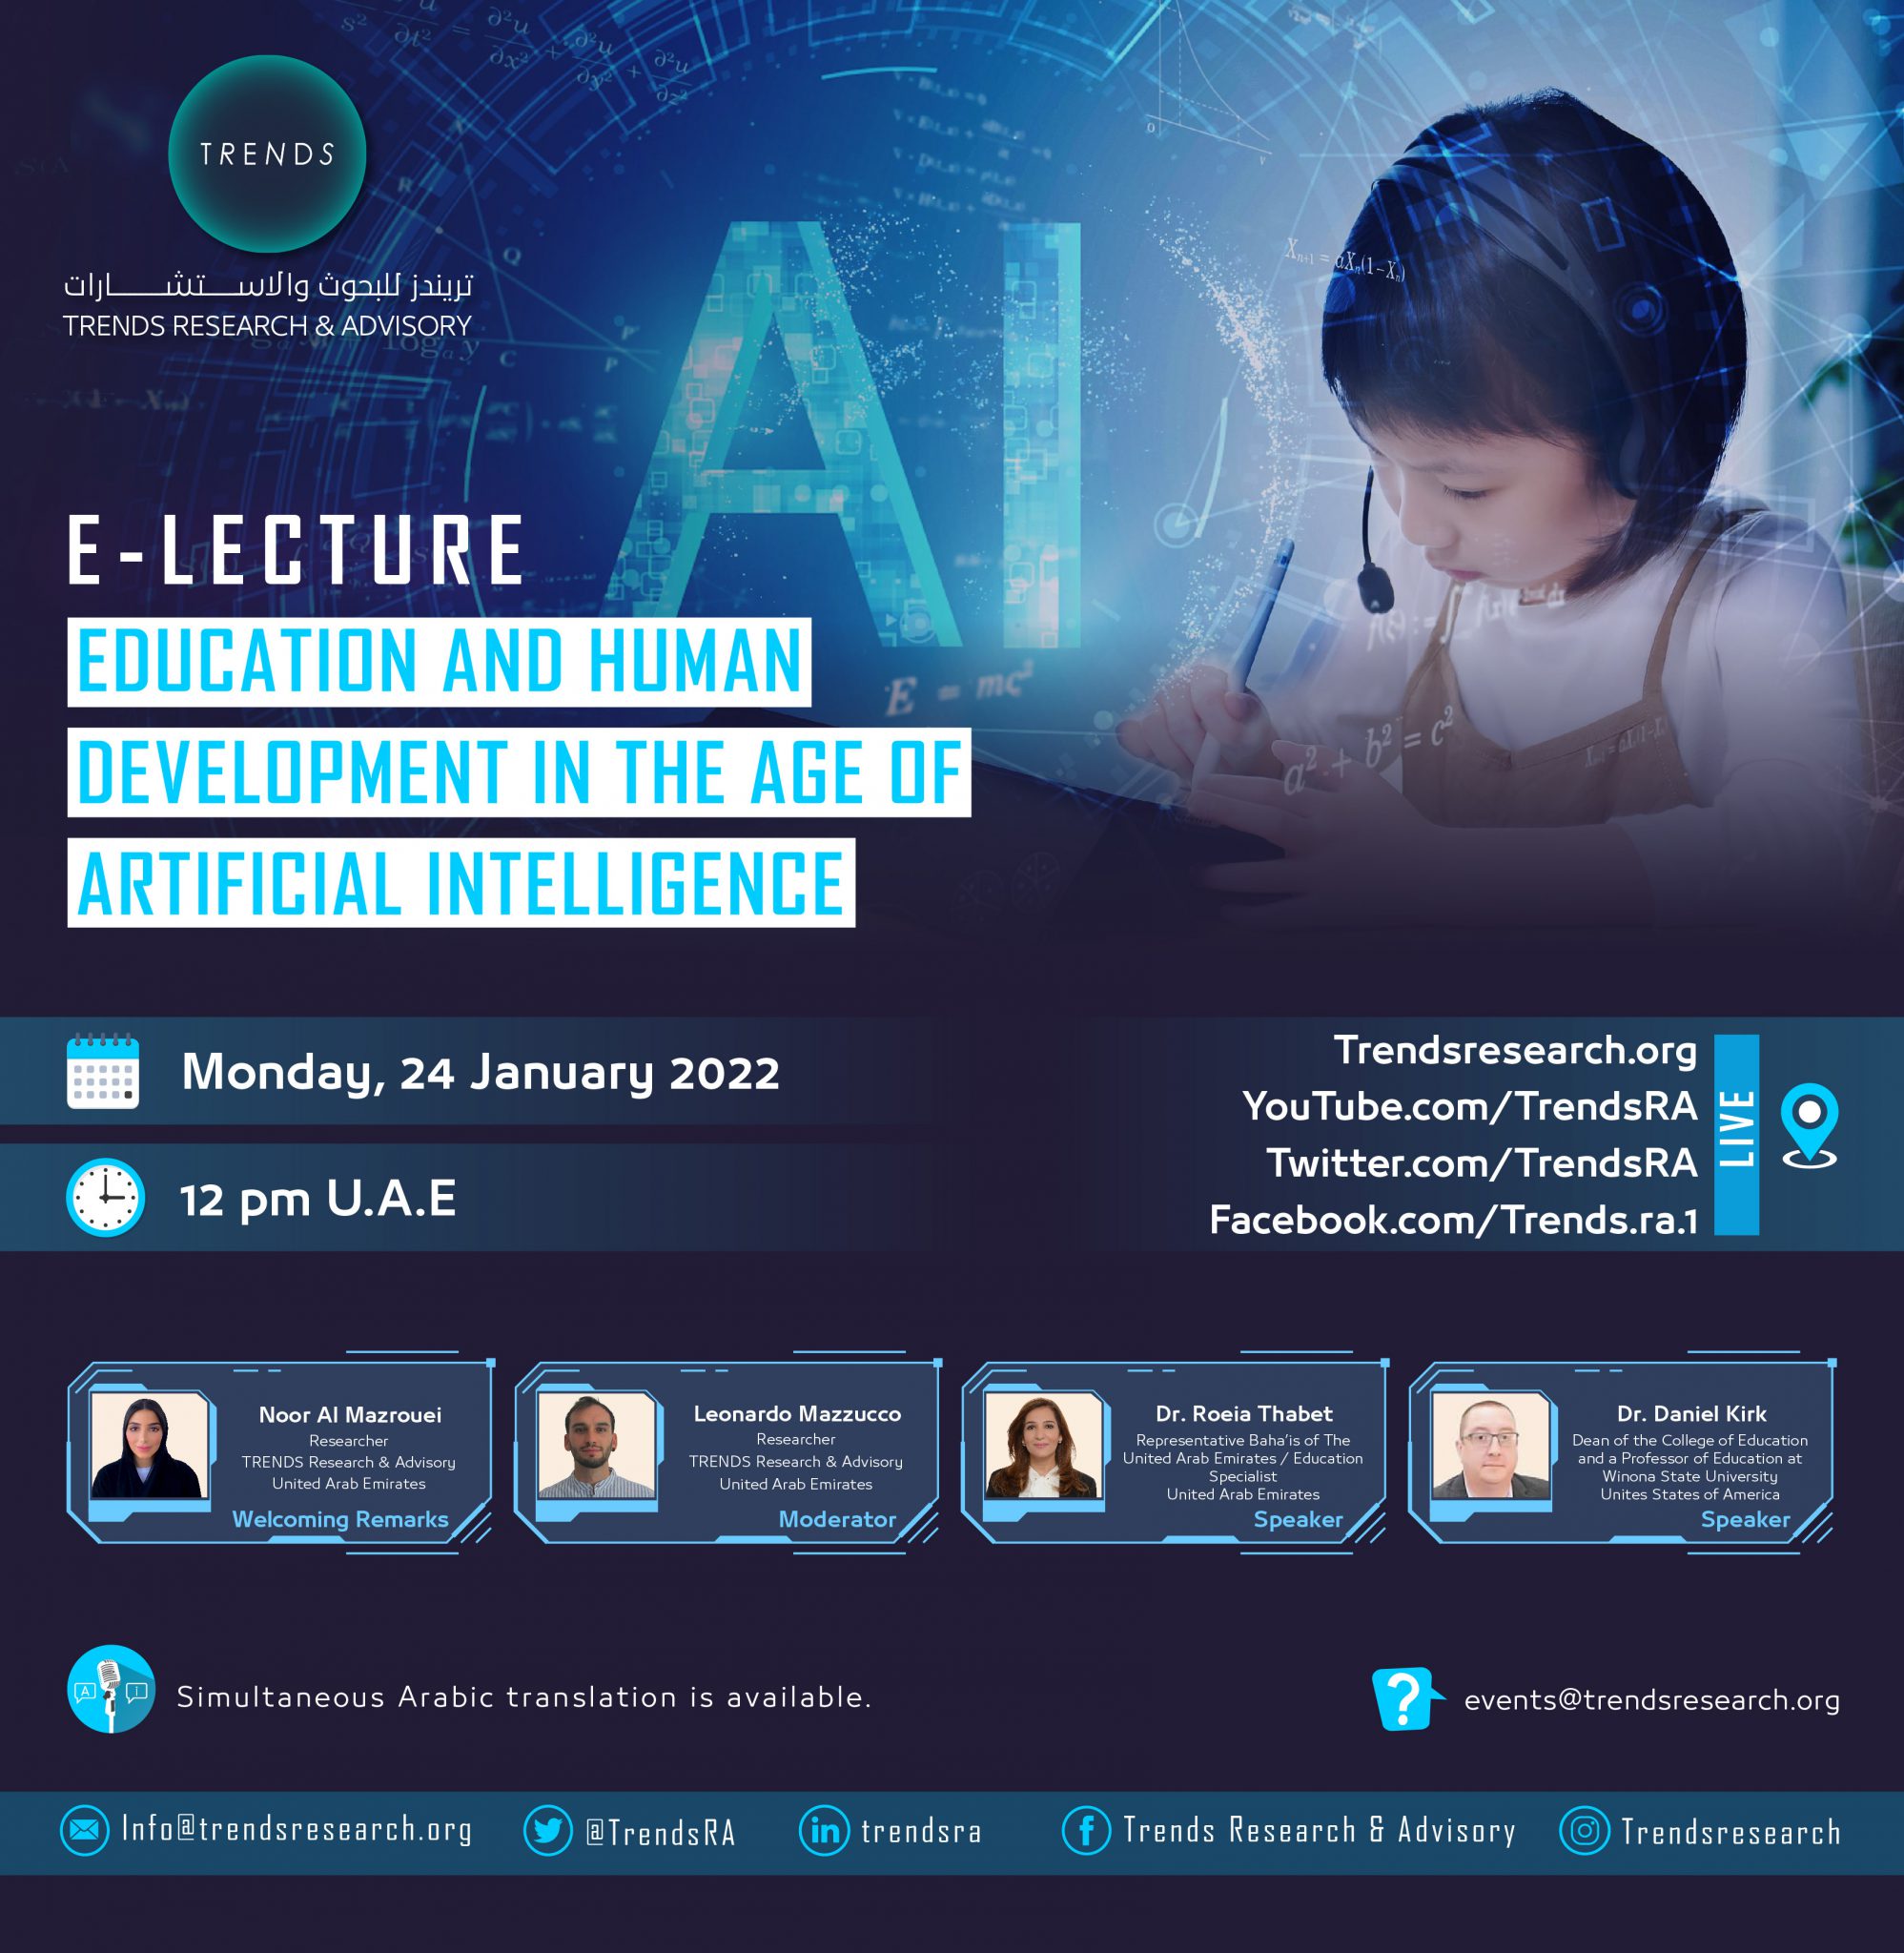 Education and human development in the age of artificial intelligence